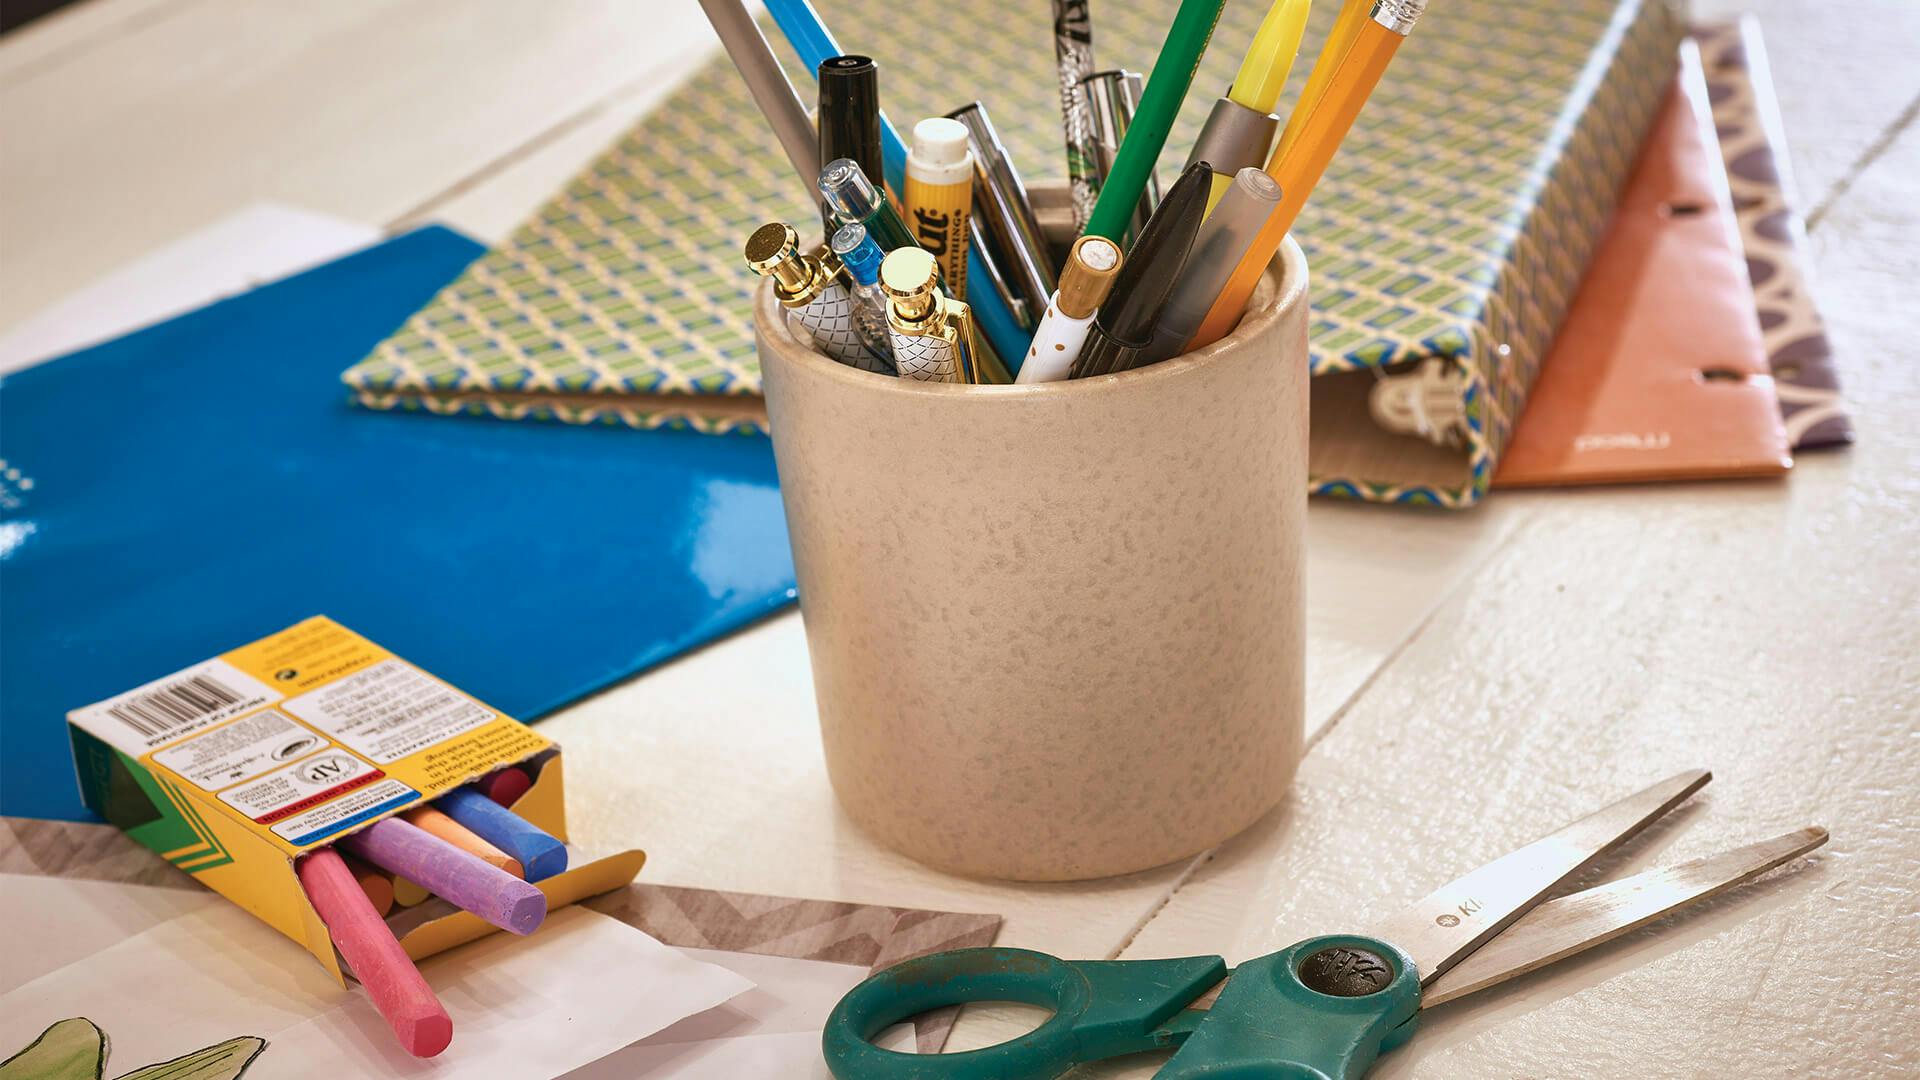 Arts and crafts supplies on a child's desk